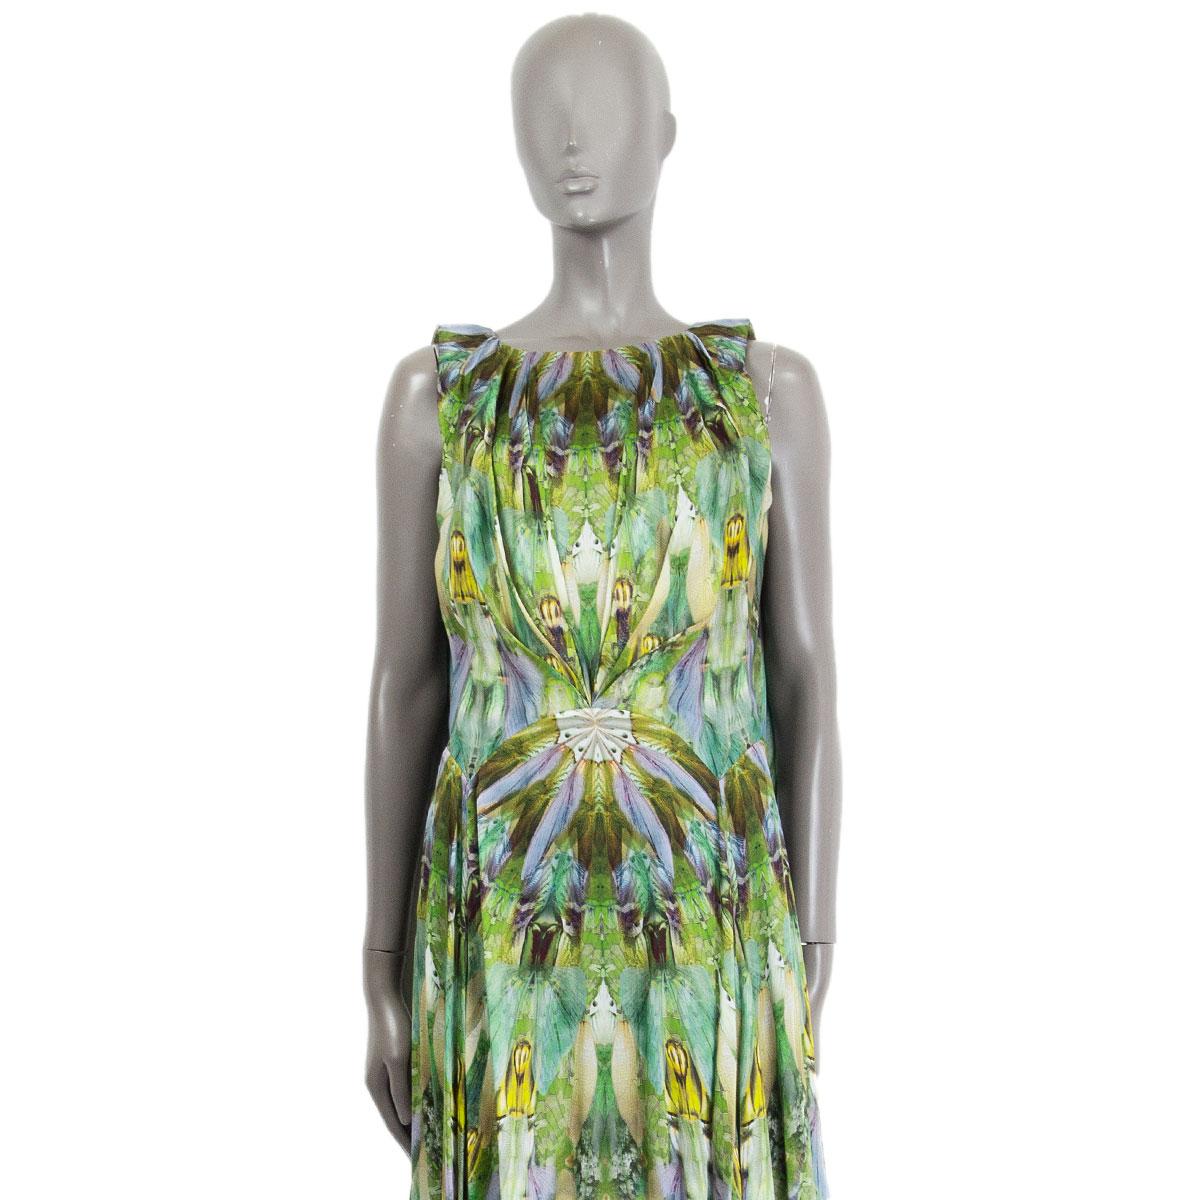 Alexander McQueen 'Praying Mantis' empire down in green silk (100%) with a round neck and is sleeveless. This collector piece is from the SS 2010 Platos Atlantis collection. Flares from the back to the sides which gives the dress a whimsical